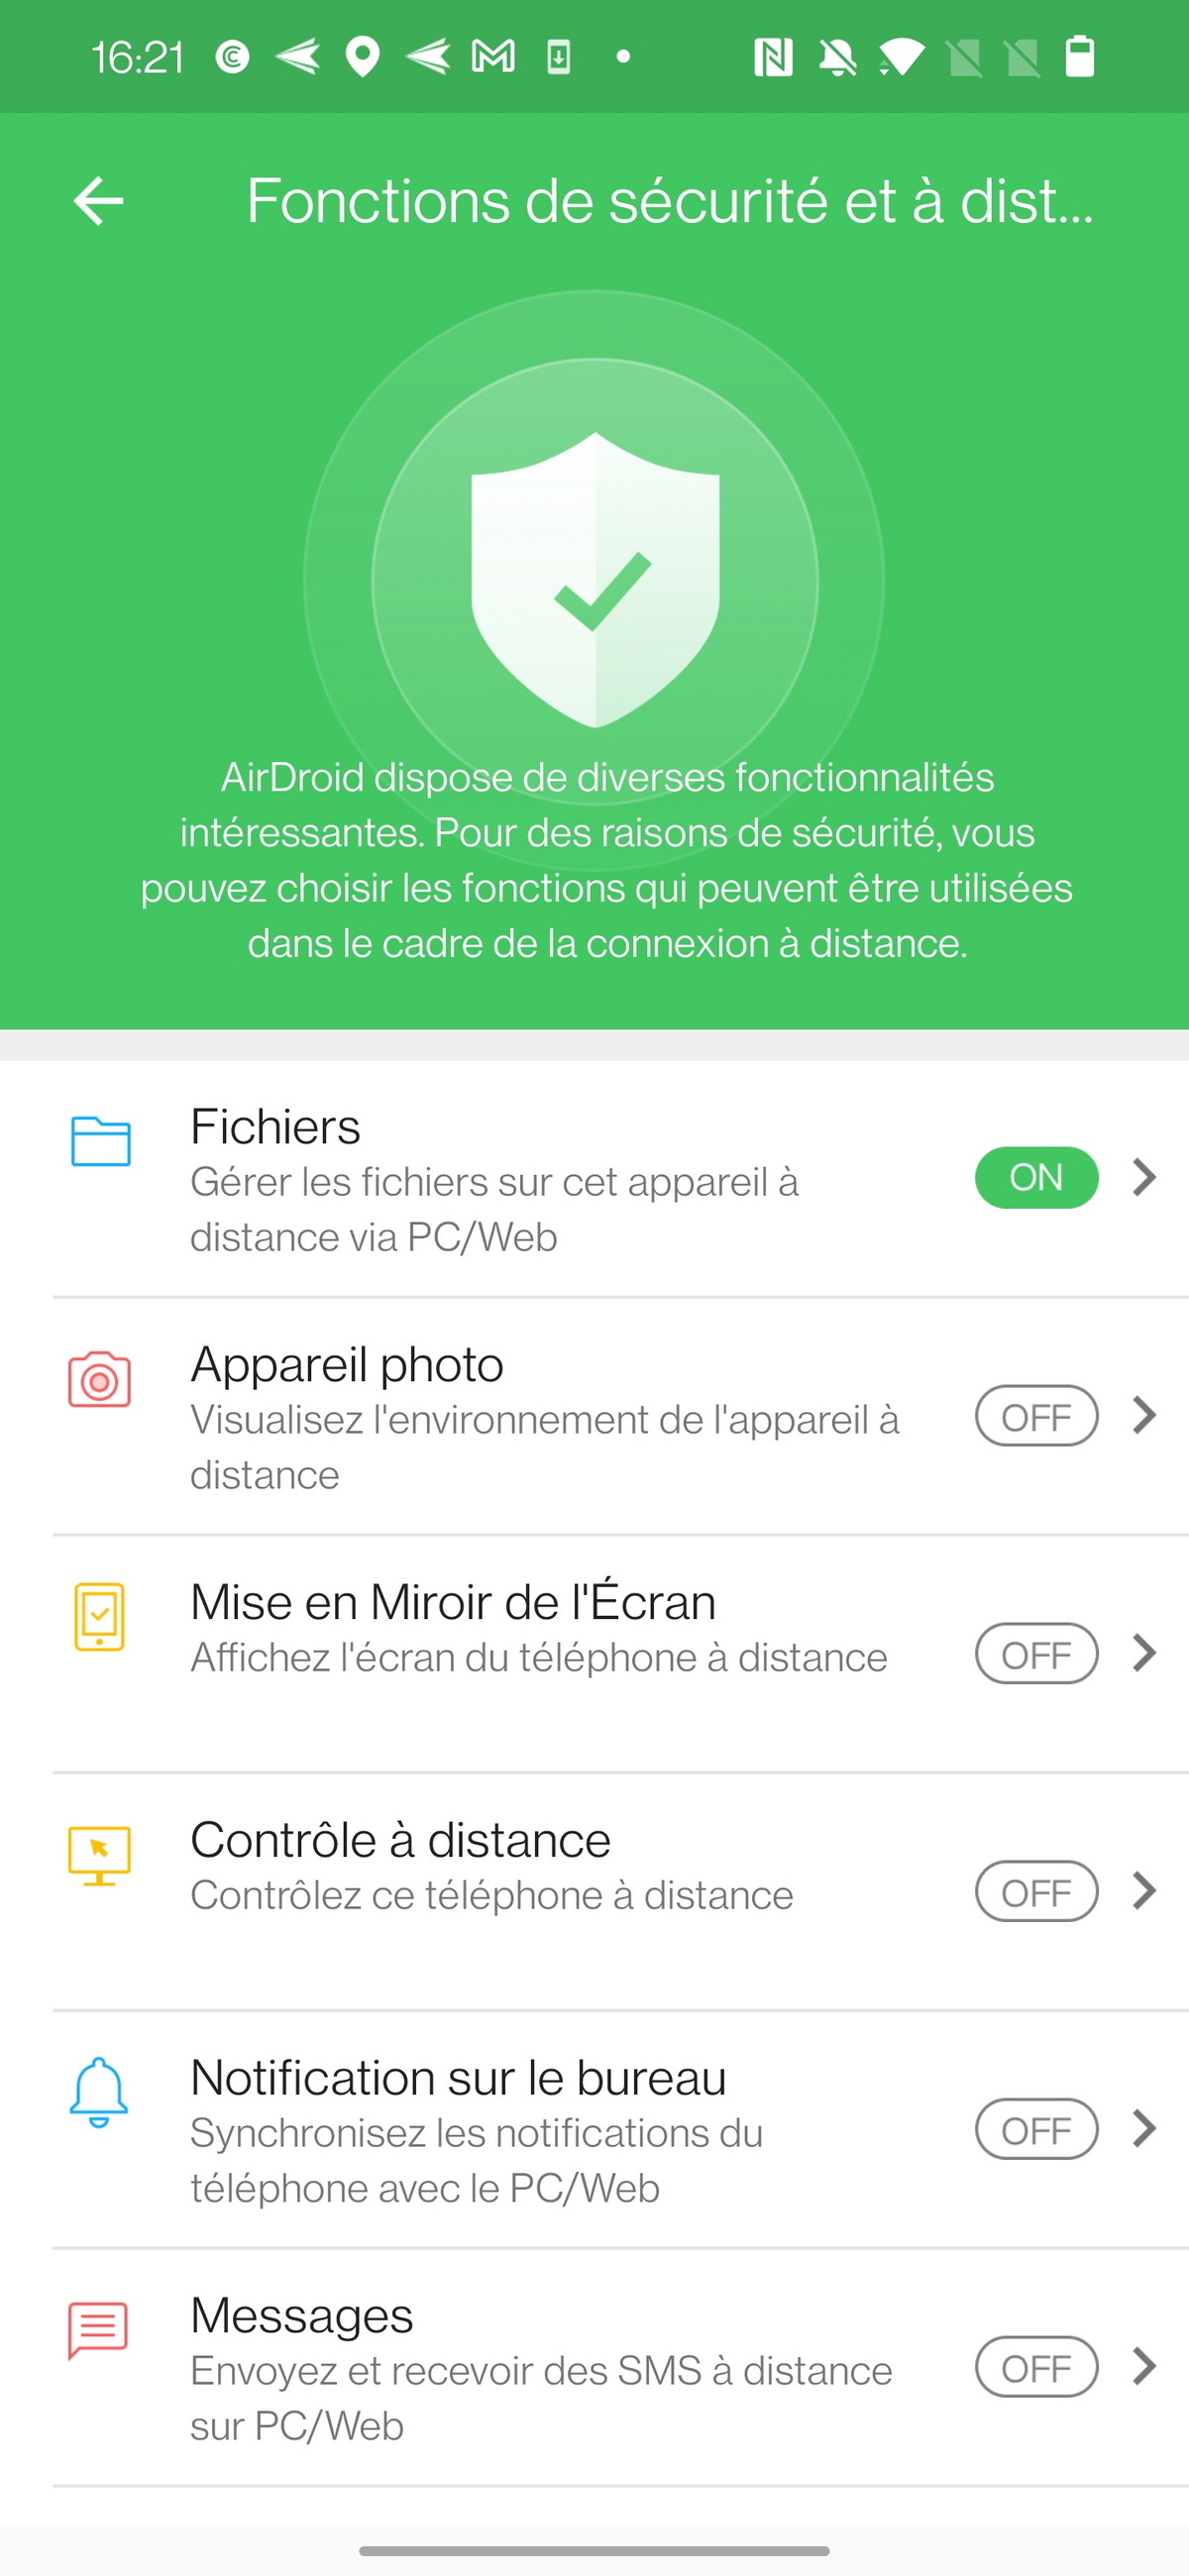 Airdroid Android